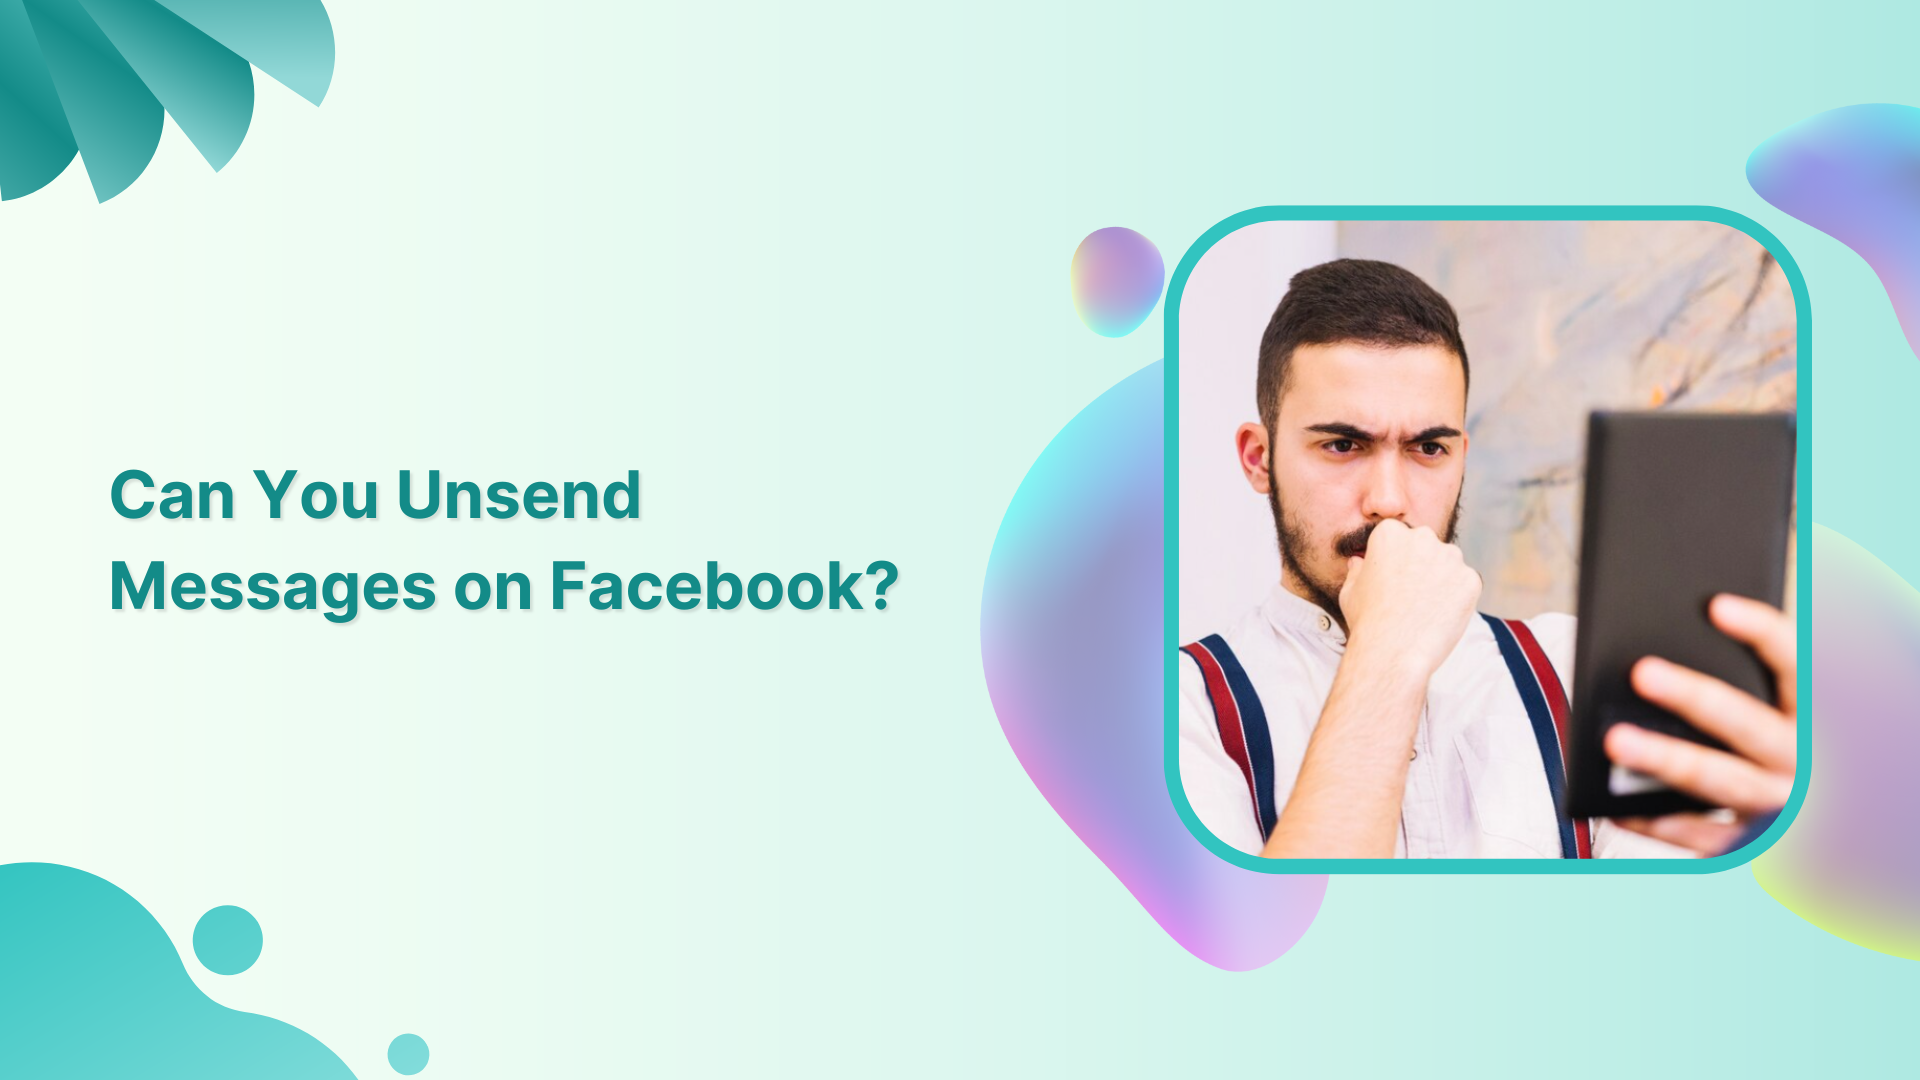 CAN YOU UNSEND MESSAGE ON FACEBOOK